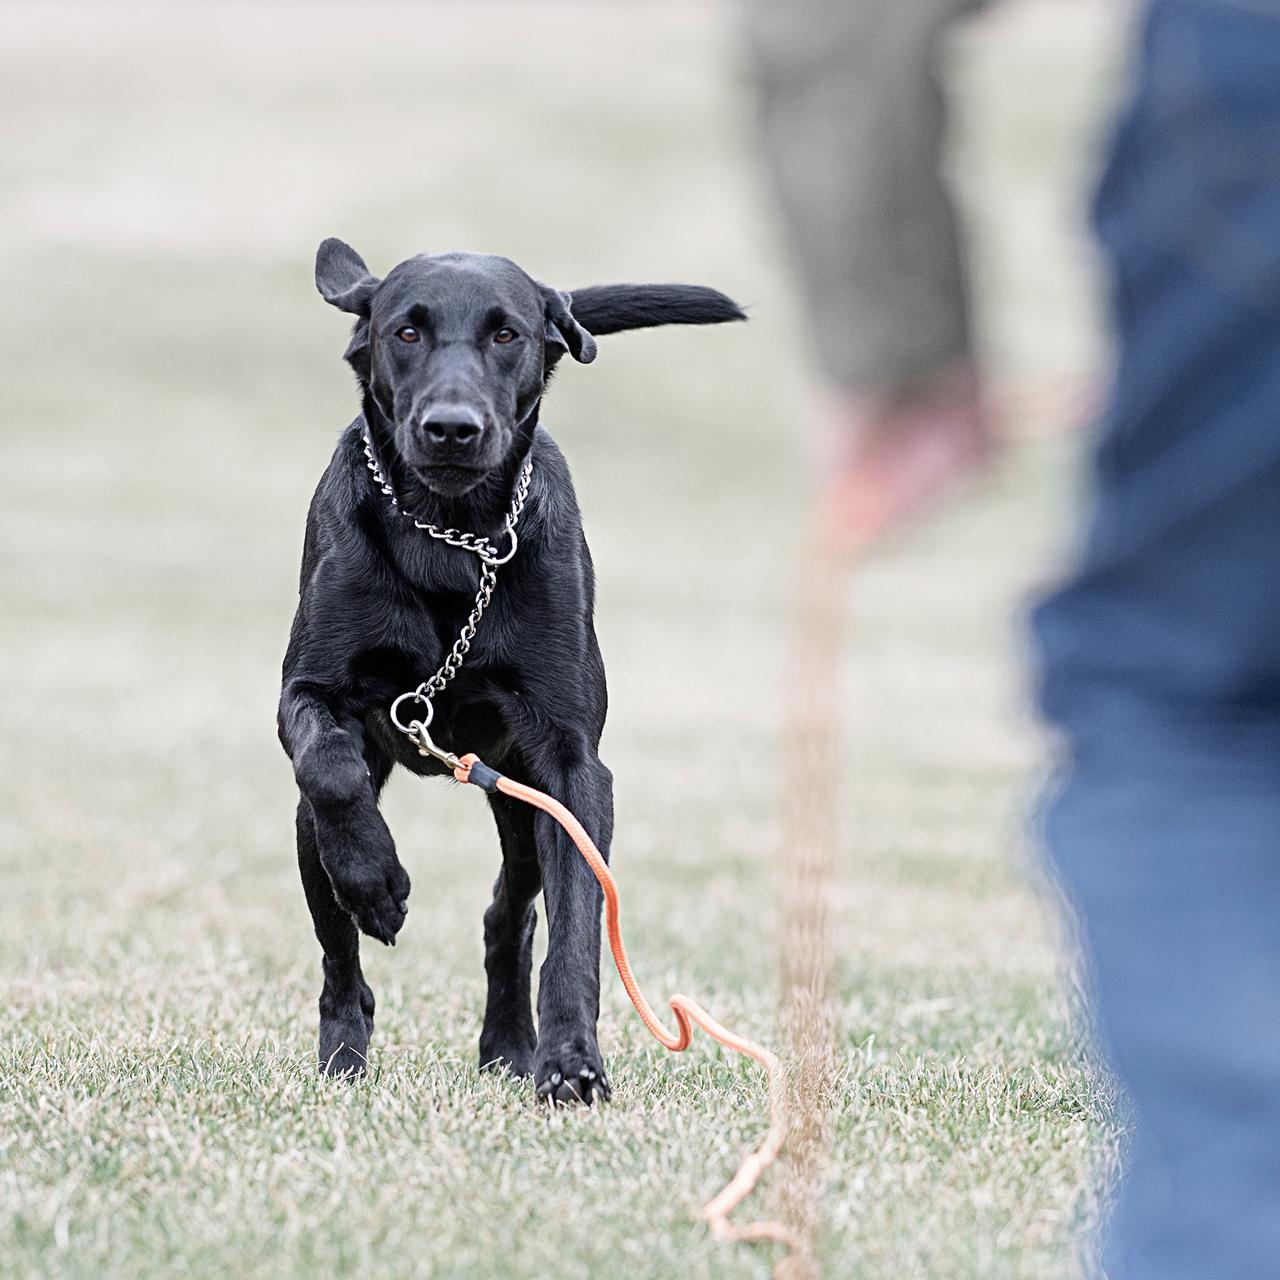 Black lab walking towards handler with check cord and training chain on.